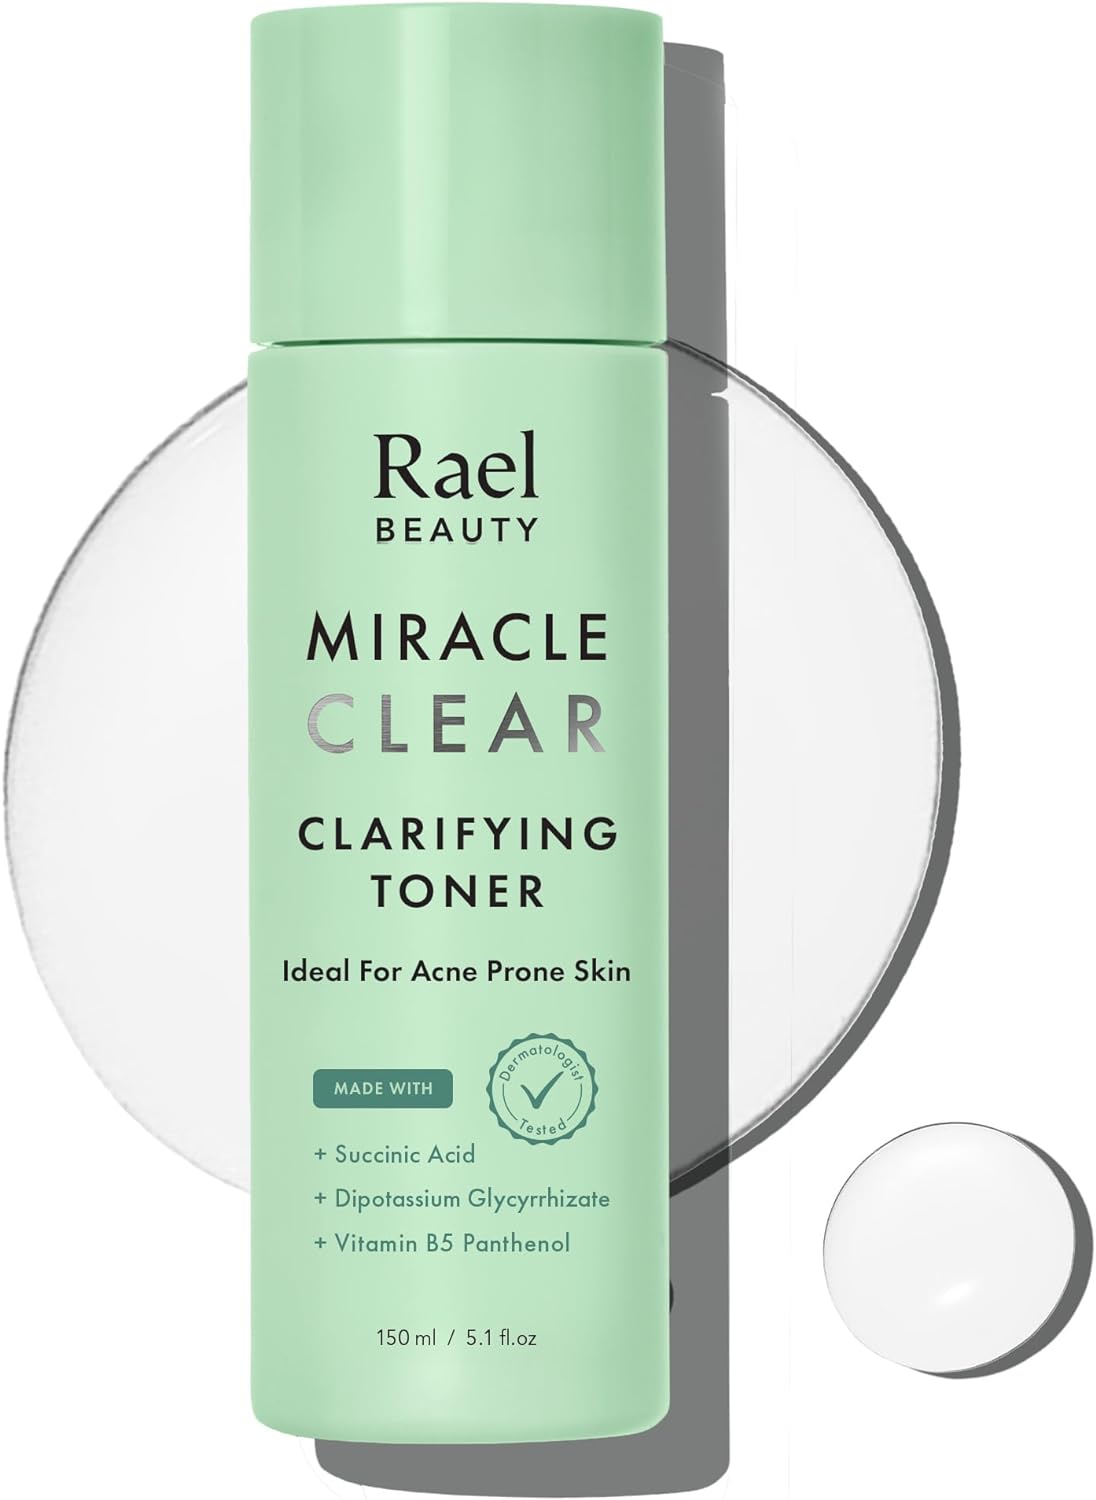 Rael Toner, Miracle Clear Clarifying Toner - Facial Toner for Face, Oily and Acne Prone Skin, Korean Skincare, with Succinic Acid, Hydrating Vitamin B5, Vegan, Cruelty Free (5.1 oz)